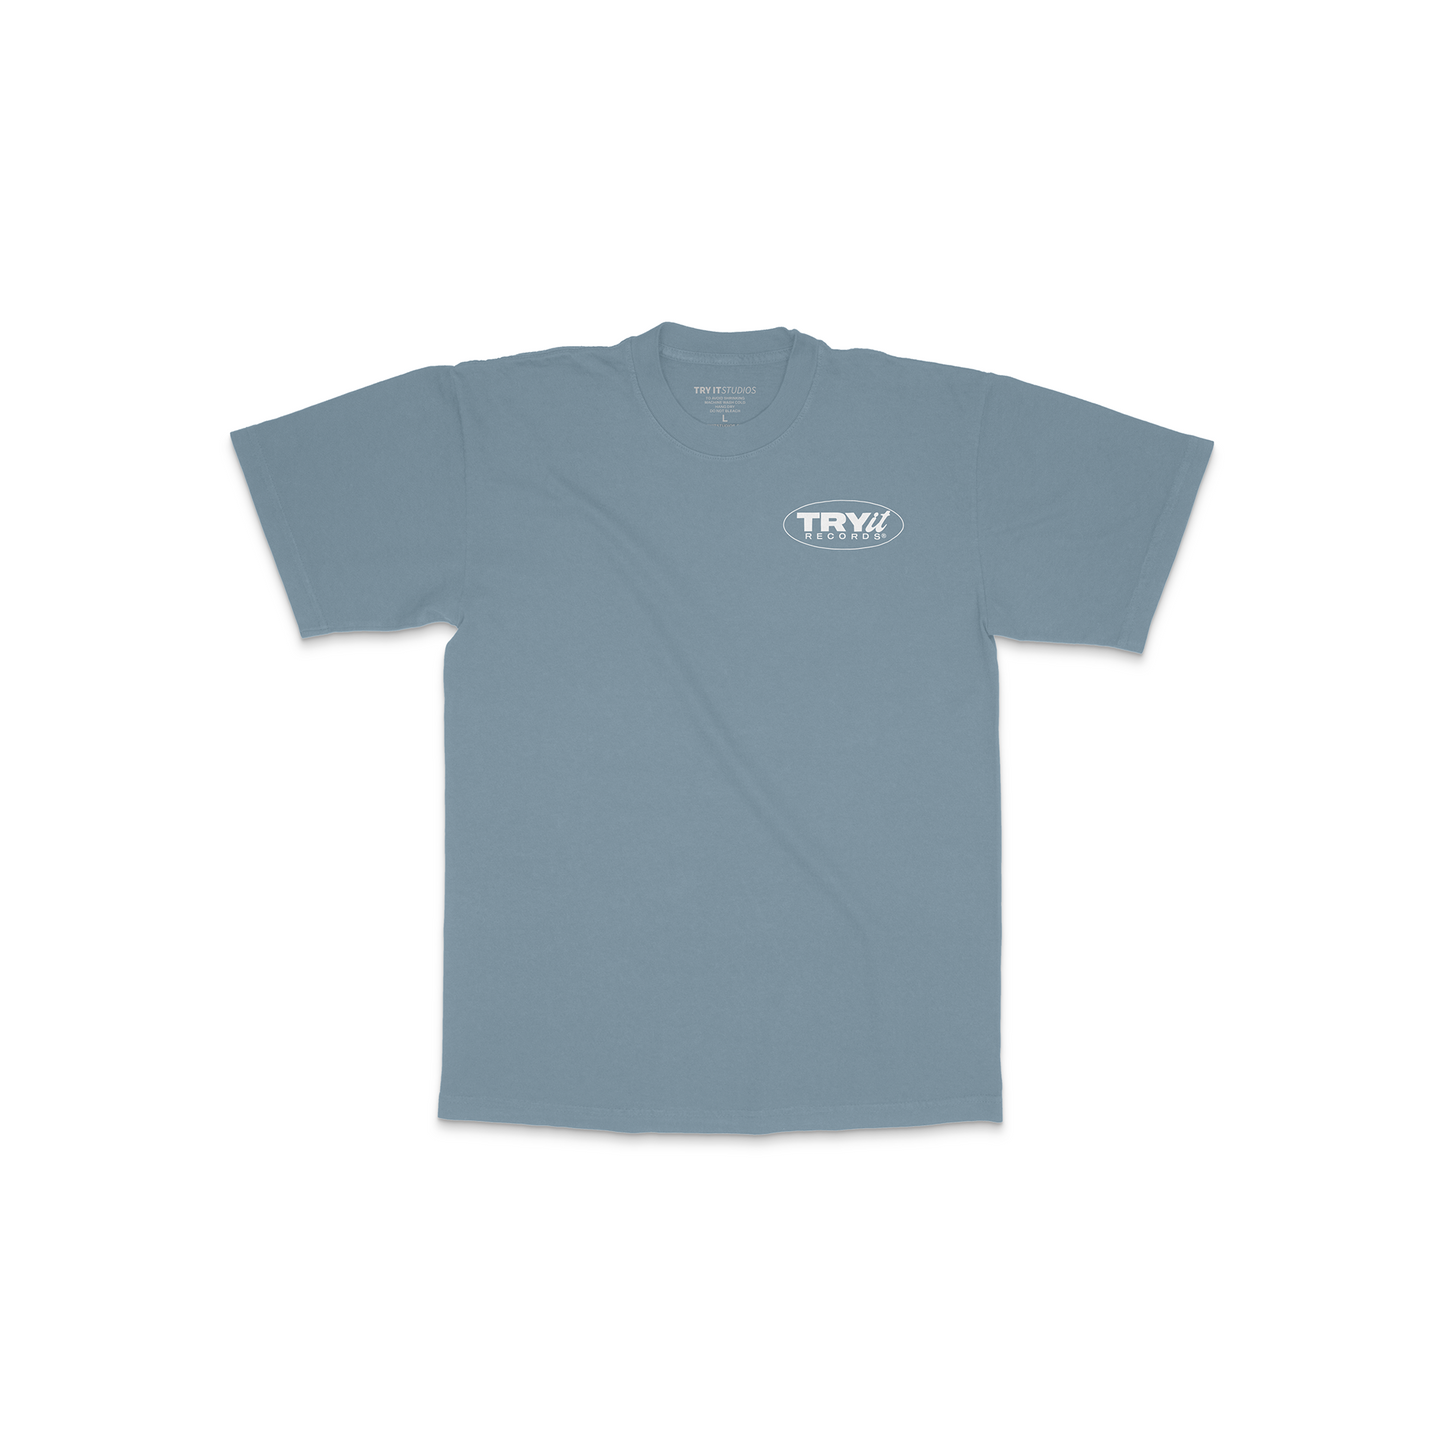 Try it Records Tee (Clear Blue)